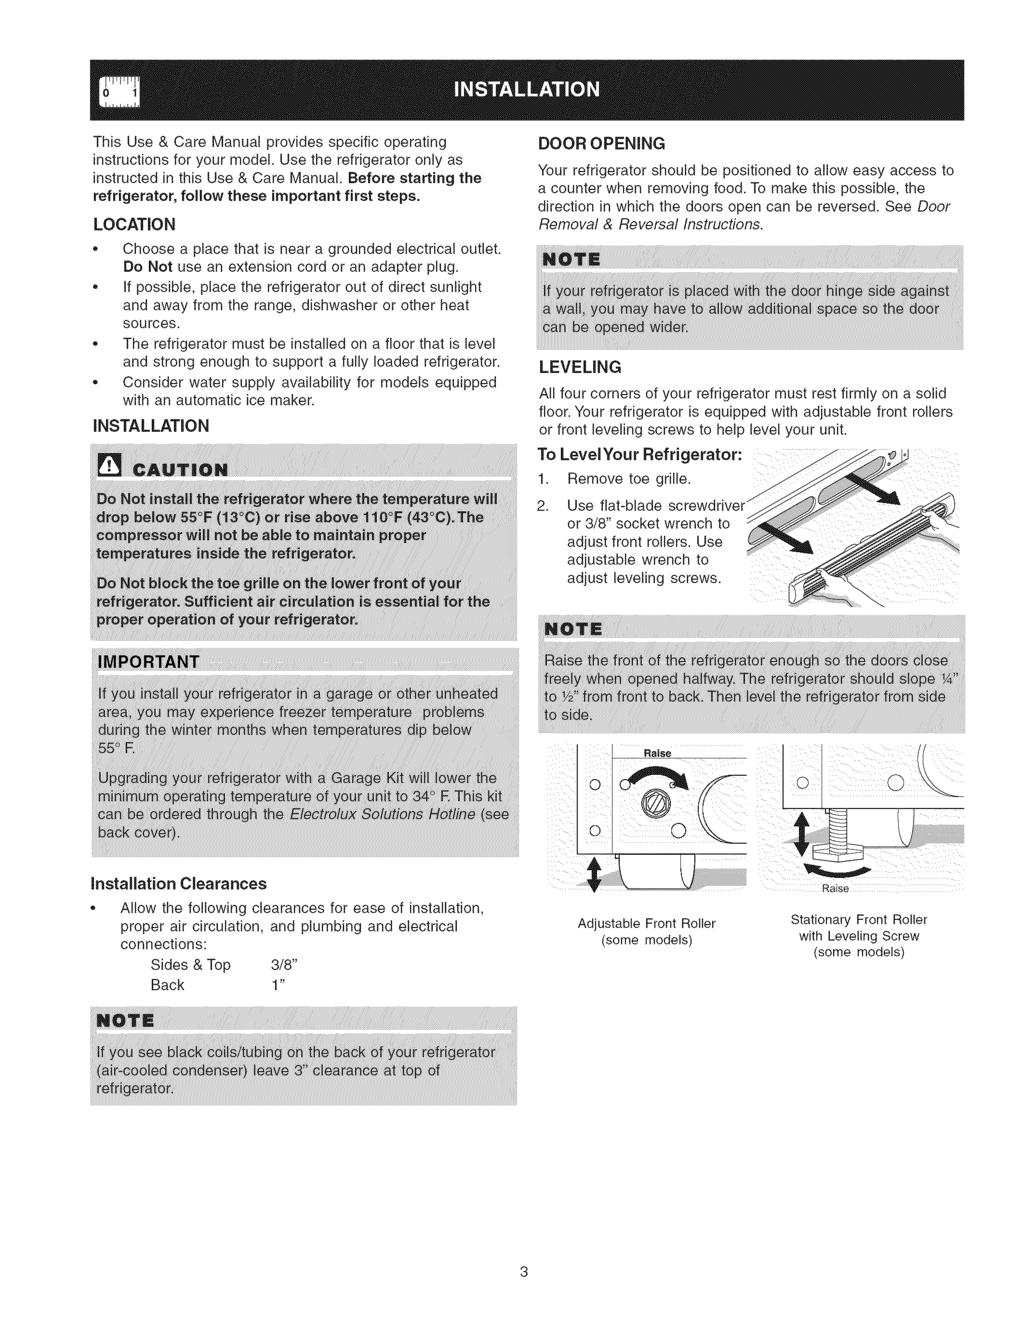 This Use & Care Manual provides specific operating instructions for your model Use the refrigerator only as instructed in this Use & Care Manual Before starting the refrigerator, follow these